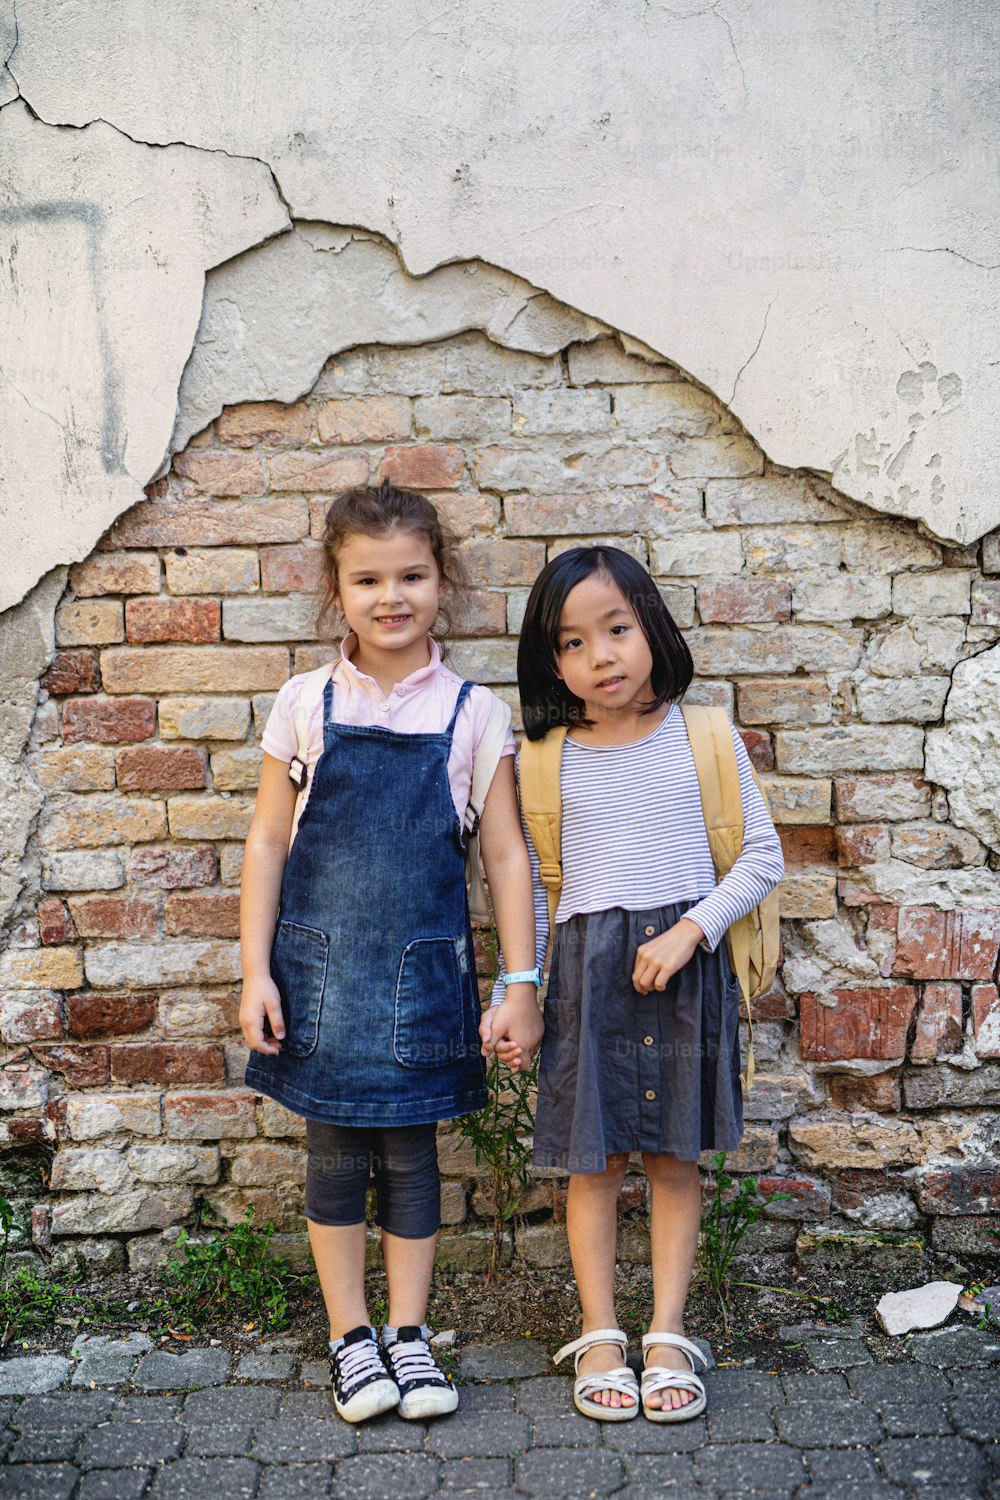 Portrait of small girls looking at camera outdoors in town, standing against old brick wall.